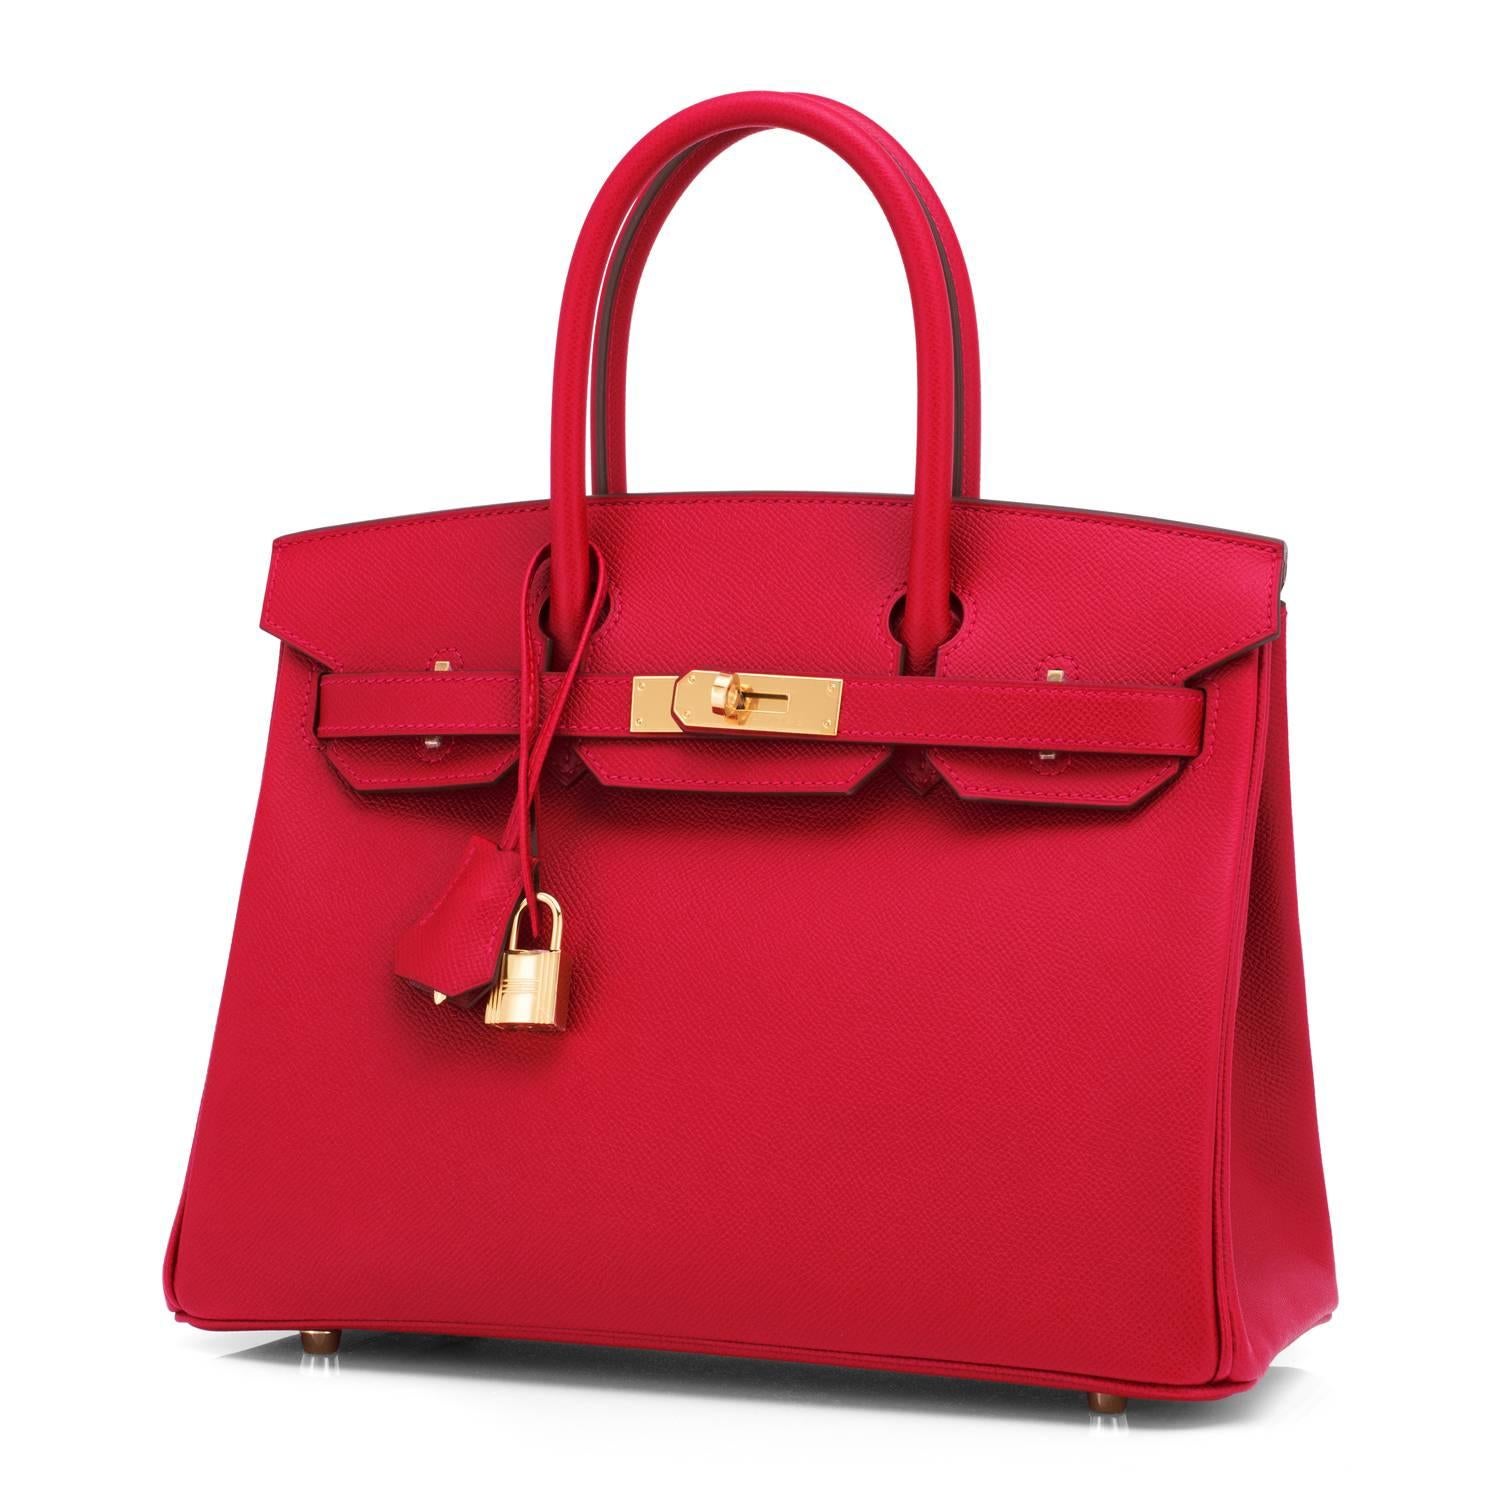 Hermes Birkin 30cm Rouge Casaque Birkin Bag Red Epsom Gold 
Brand New in Box. Store fresh. Pristine condition (with plastic on hardware).
Just purchased from Hermes store! Bag bears new interior 2020 Y Stamp.
Perfect gift! Coming full set with keys,